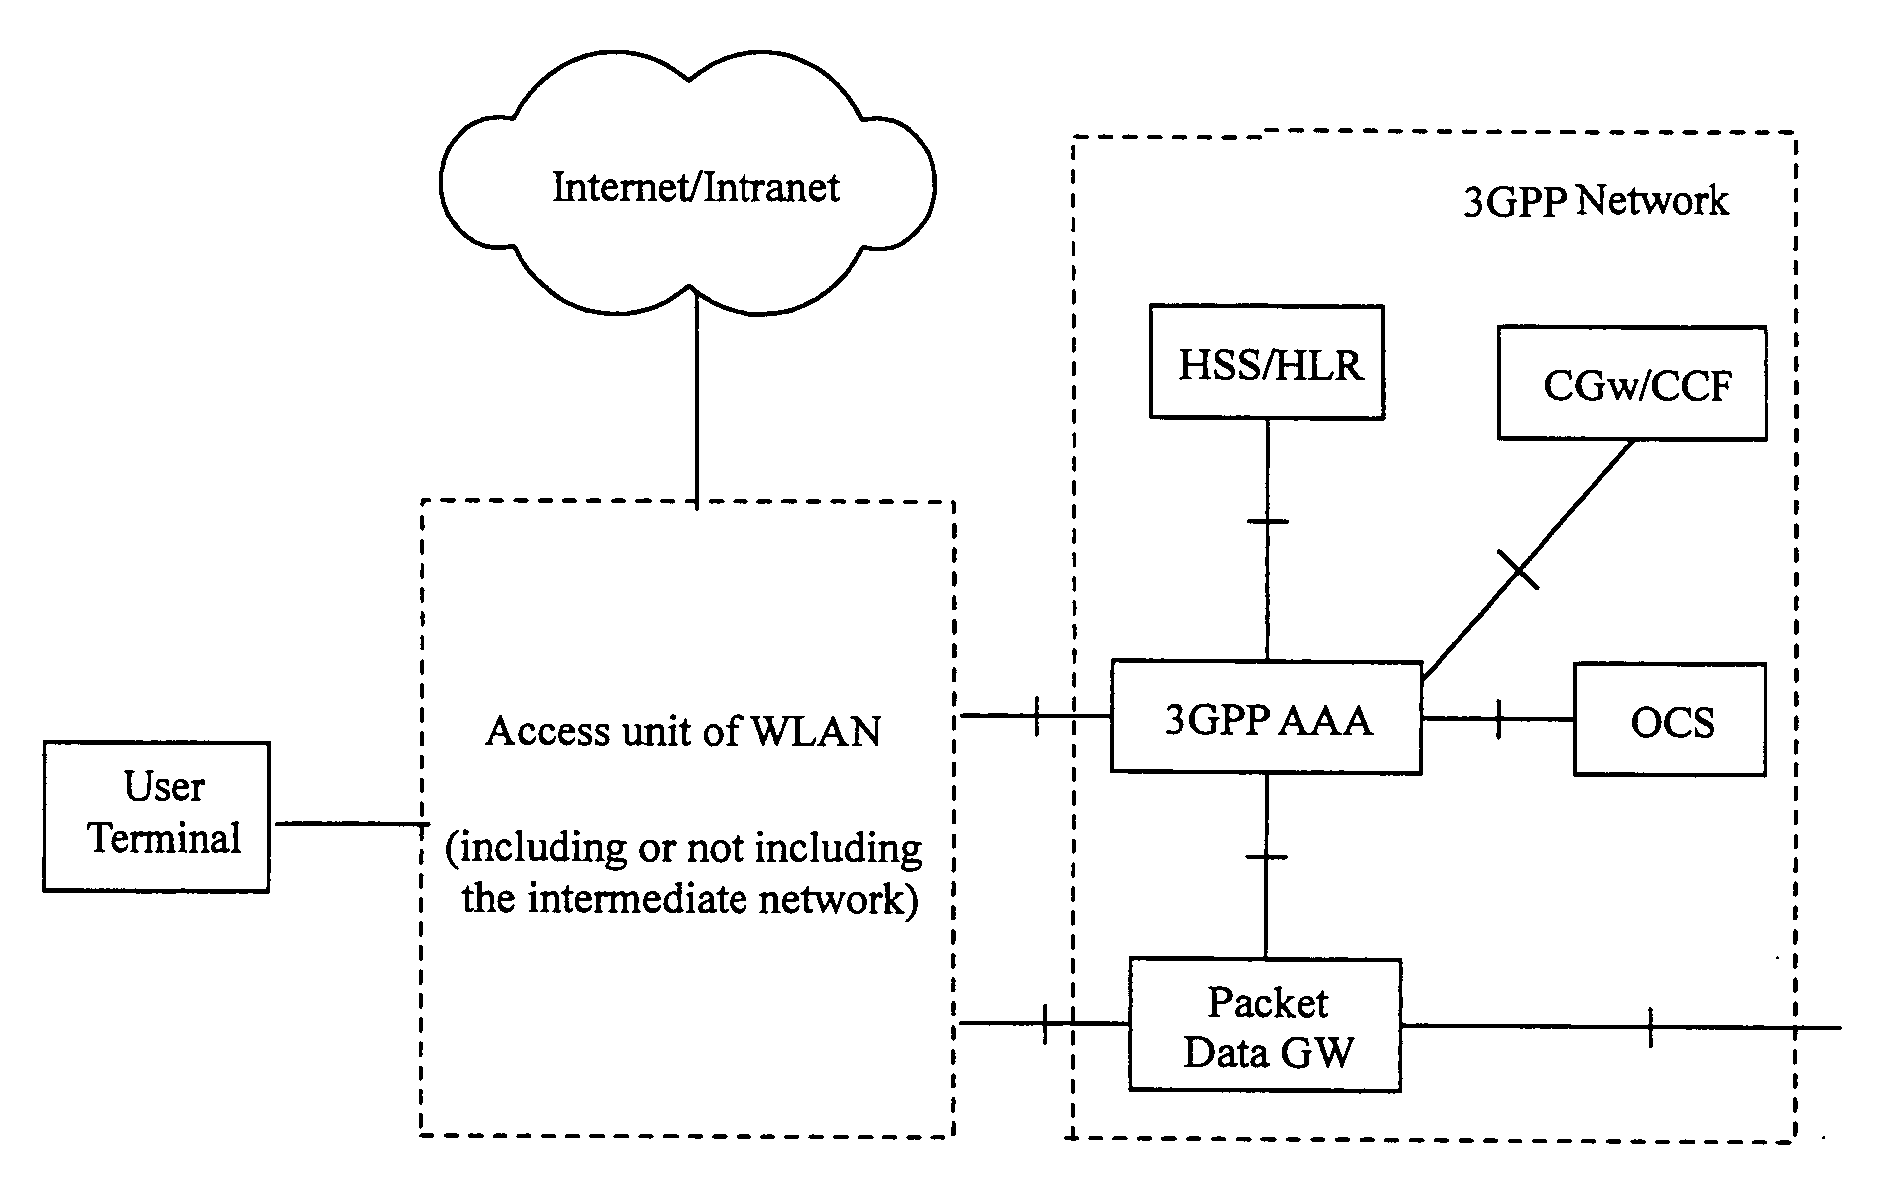 Process method about the service connection between the wireless local area network and user terminal